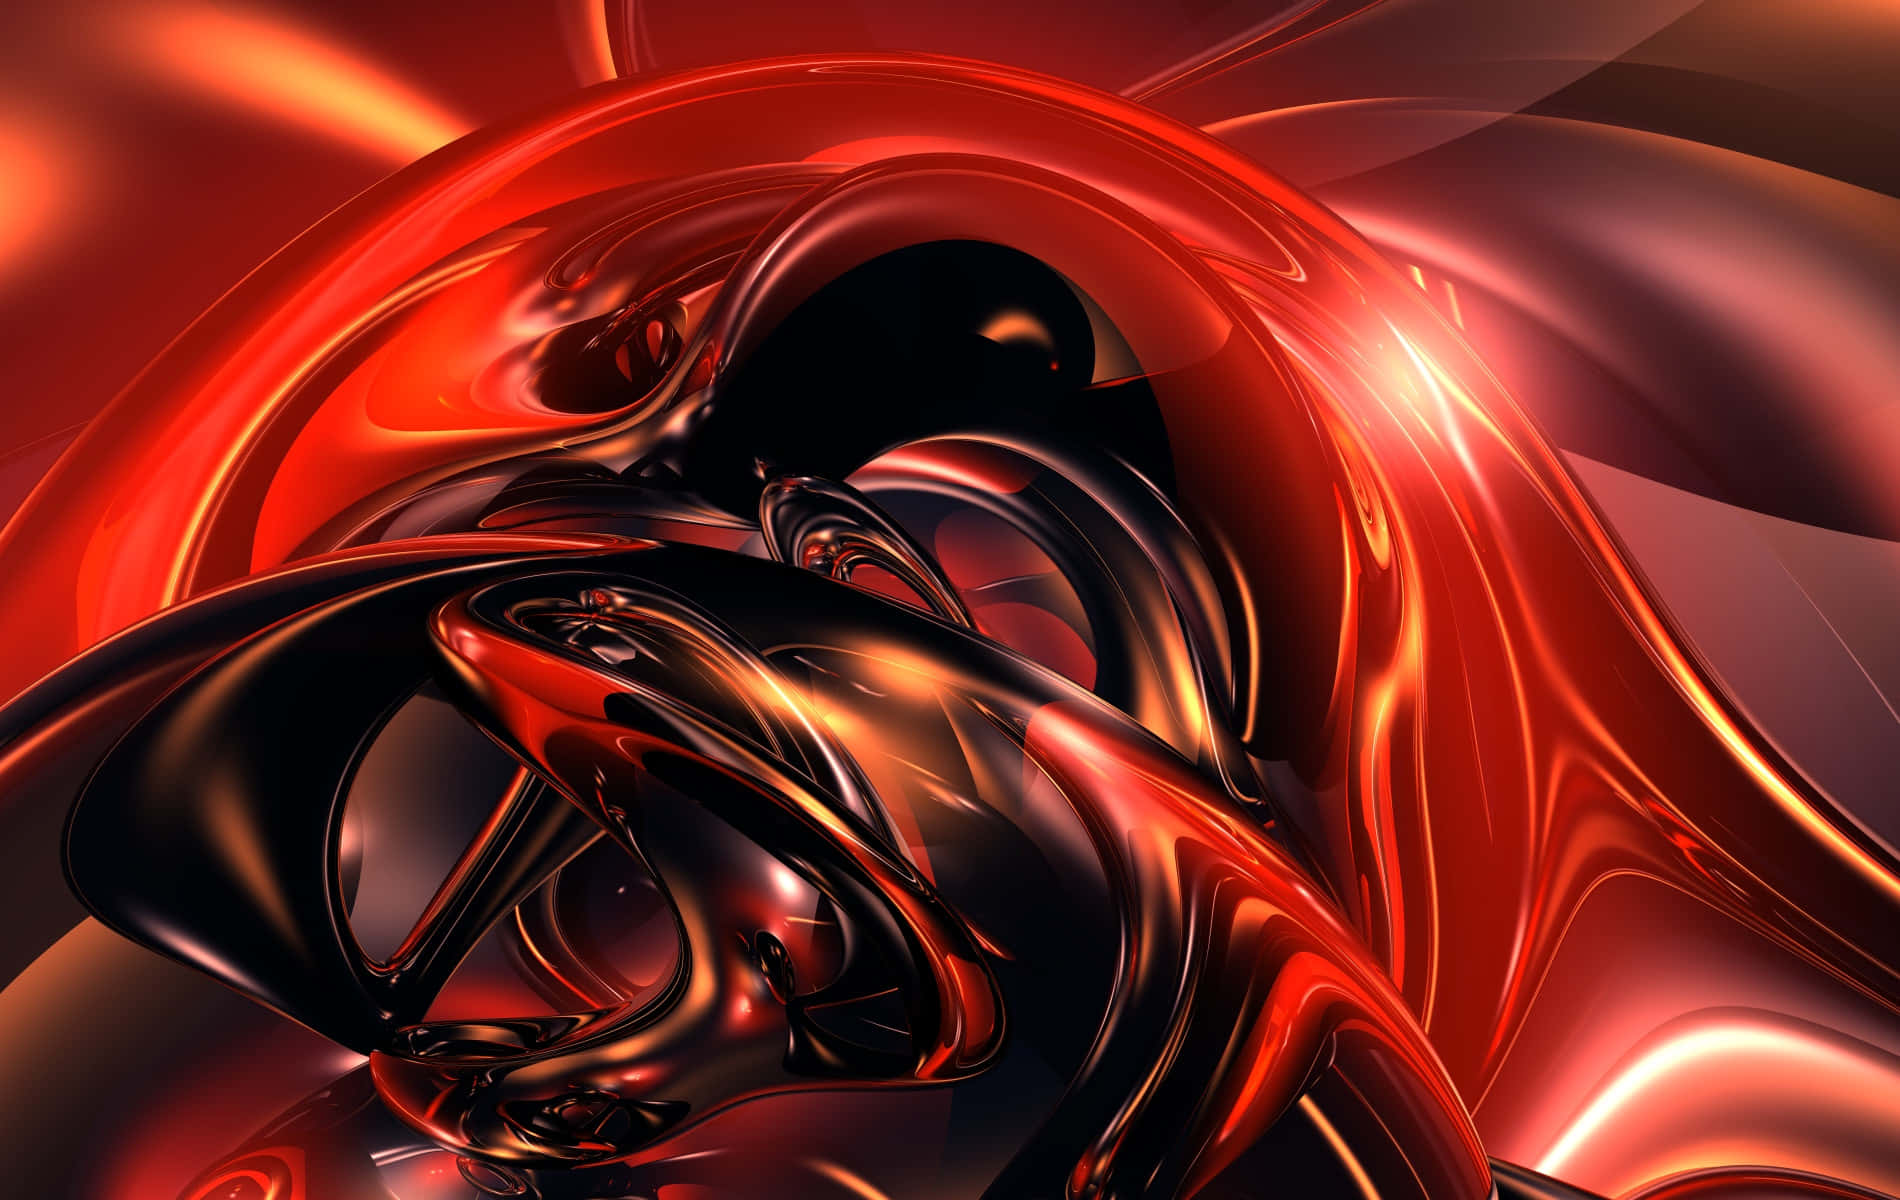 A Red Abstract Art With Black And Red Swirls